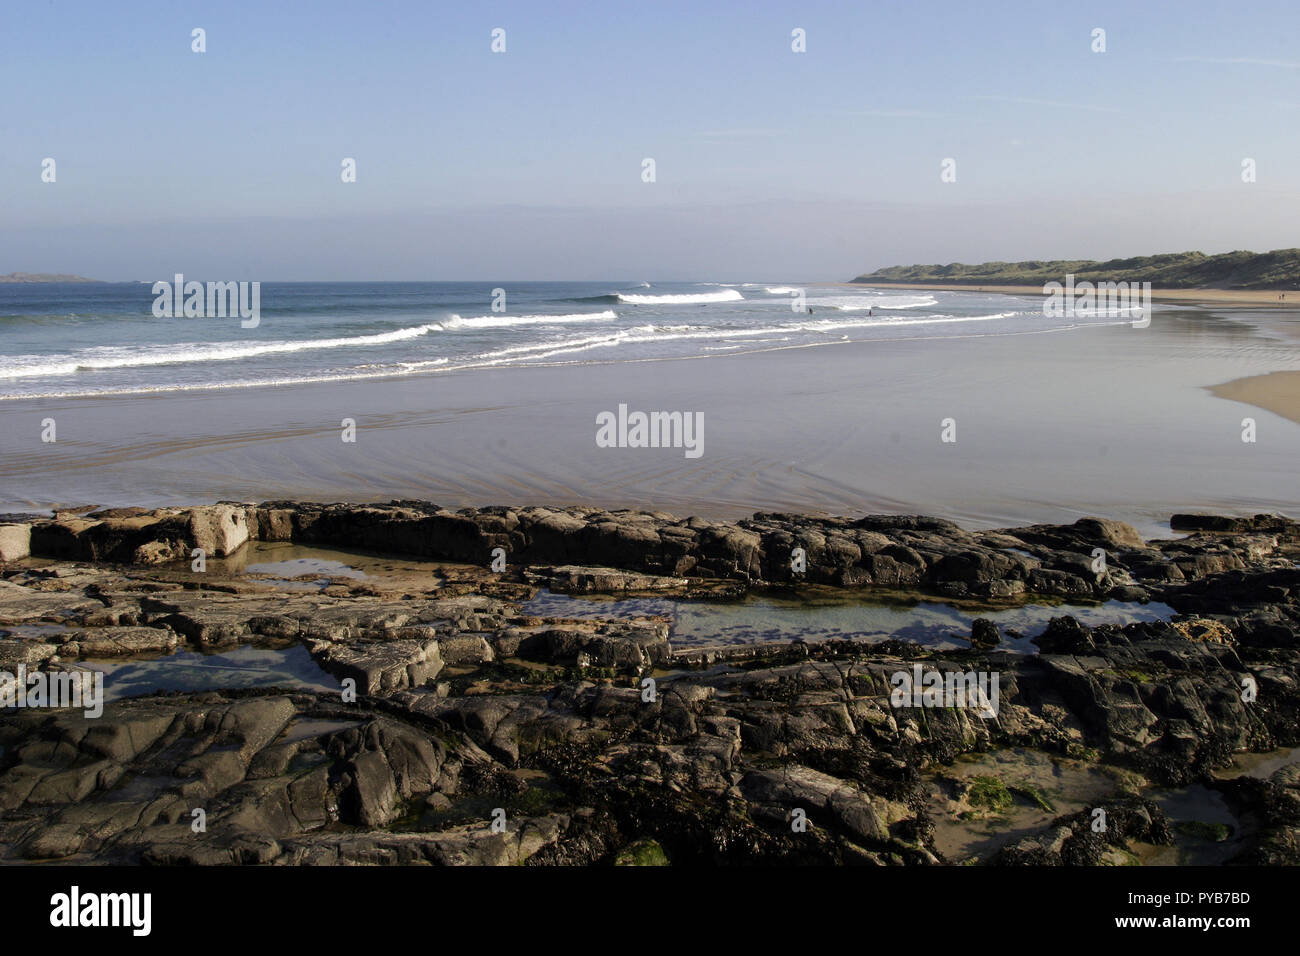 The sea and the beach at the town of Portrush looks tempting enough to go for a dip. I'll bet is freezing though. It is much more pleasurable looking at the beauty of it. Stock Photo